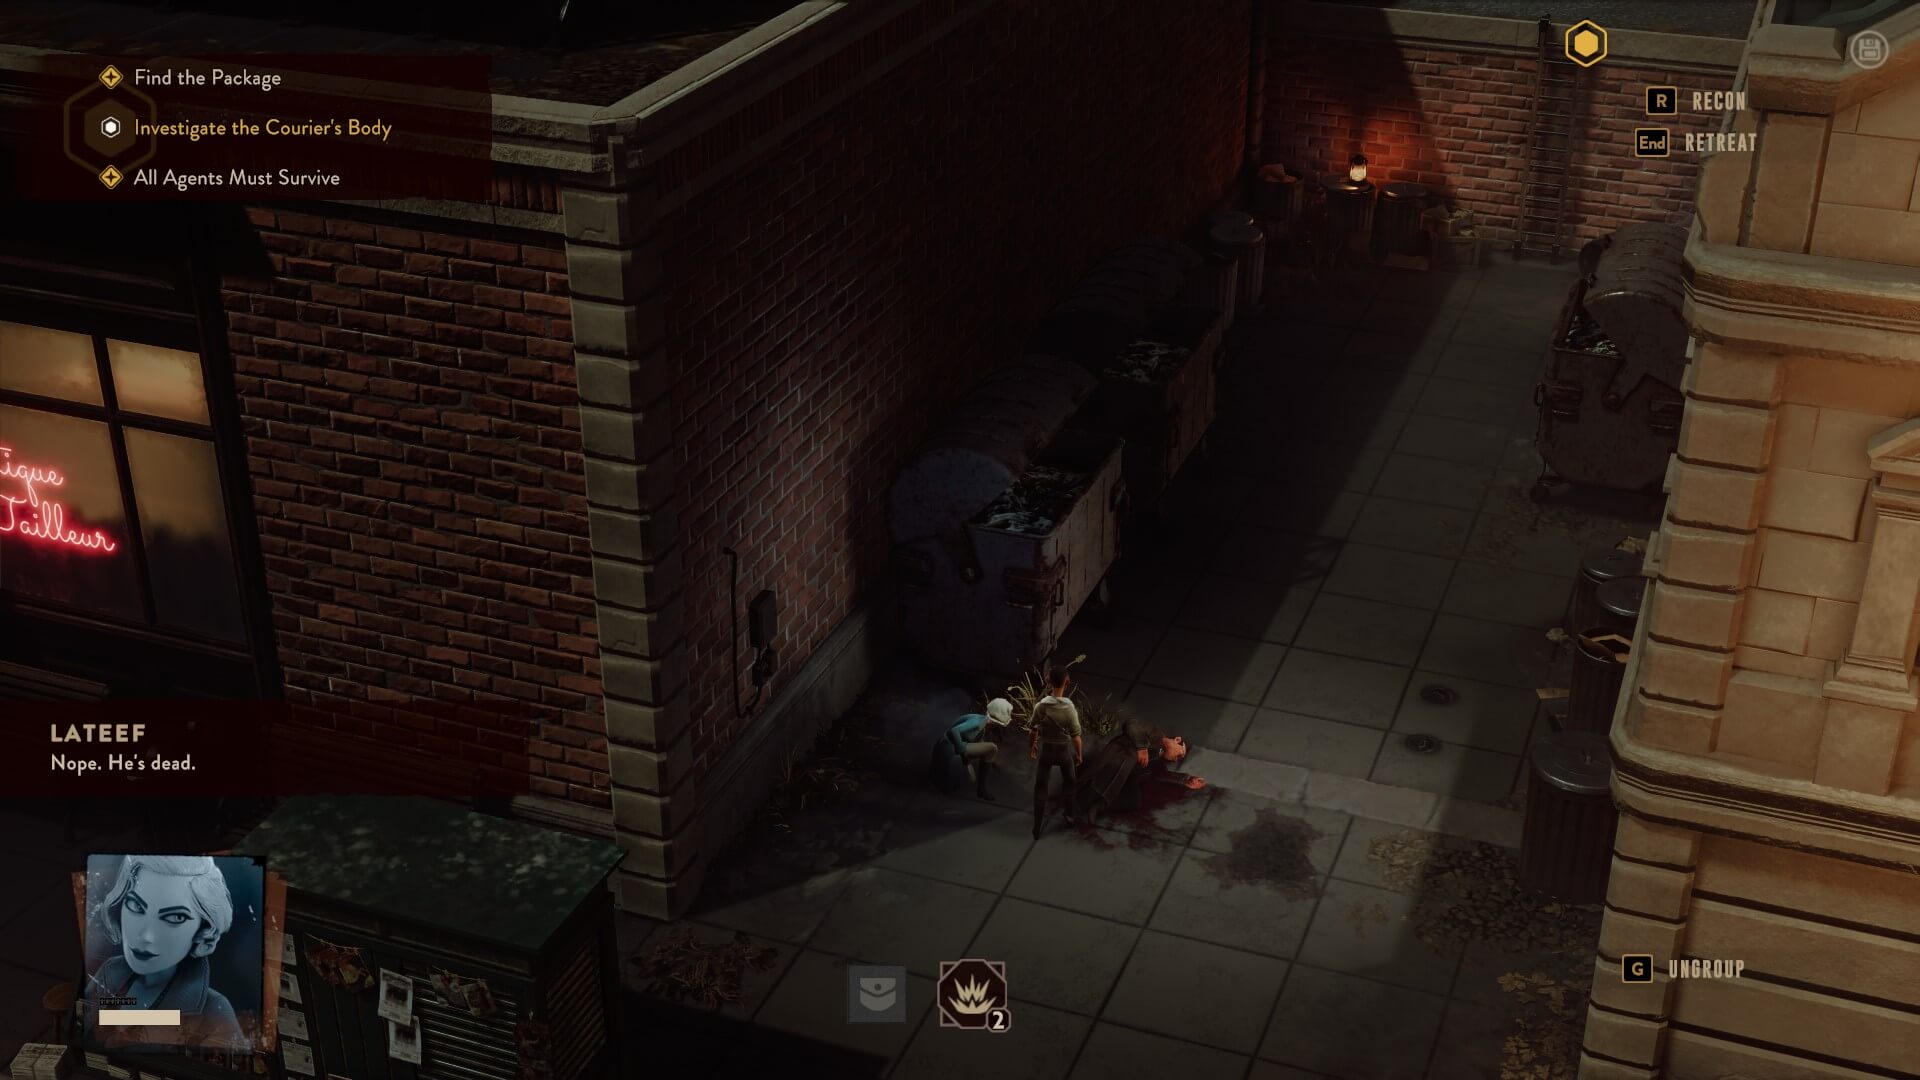 The body of the Courier, found in a dark alley. The two characters are Ingrid and Lateef. The overall aesthetic of the game seems to be from either the 30's or 40's.